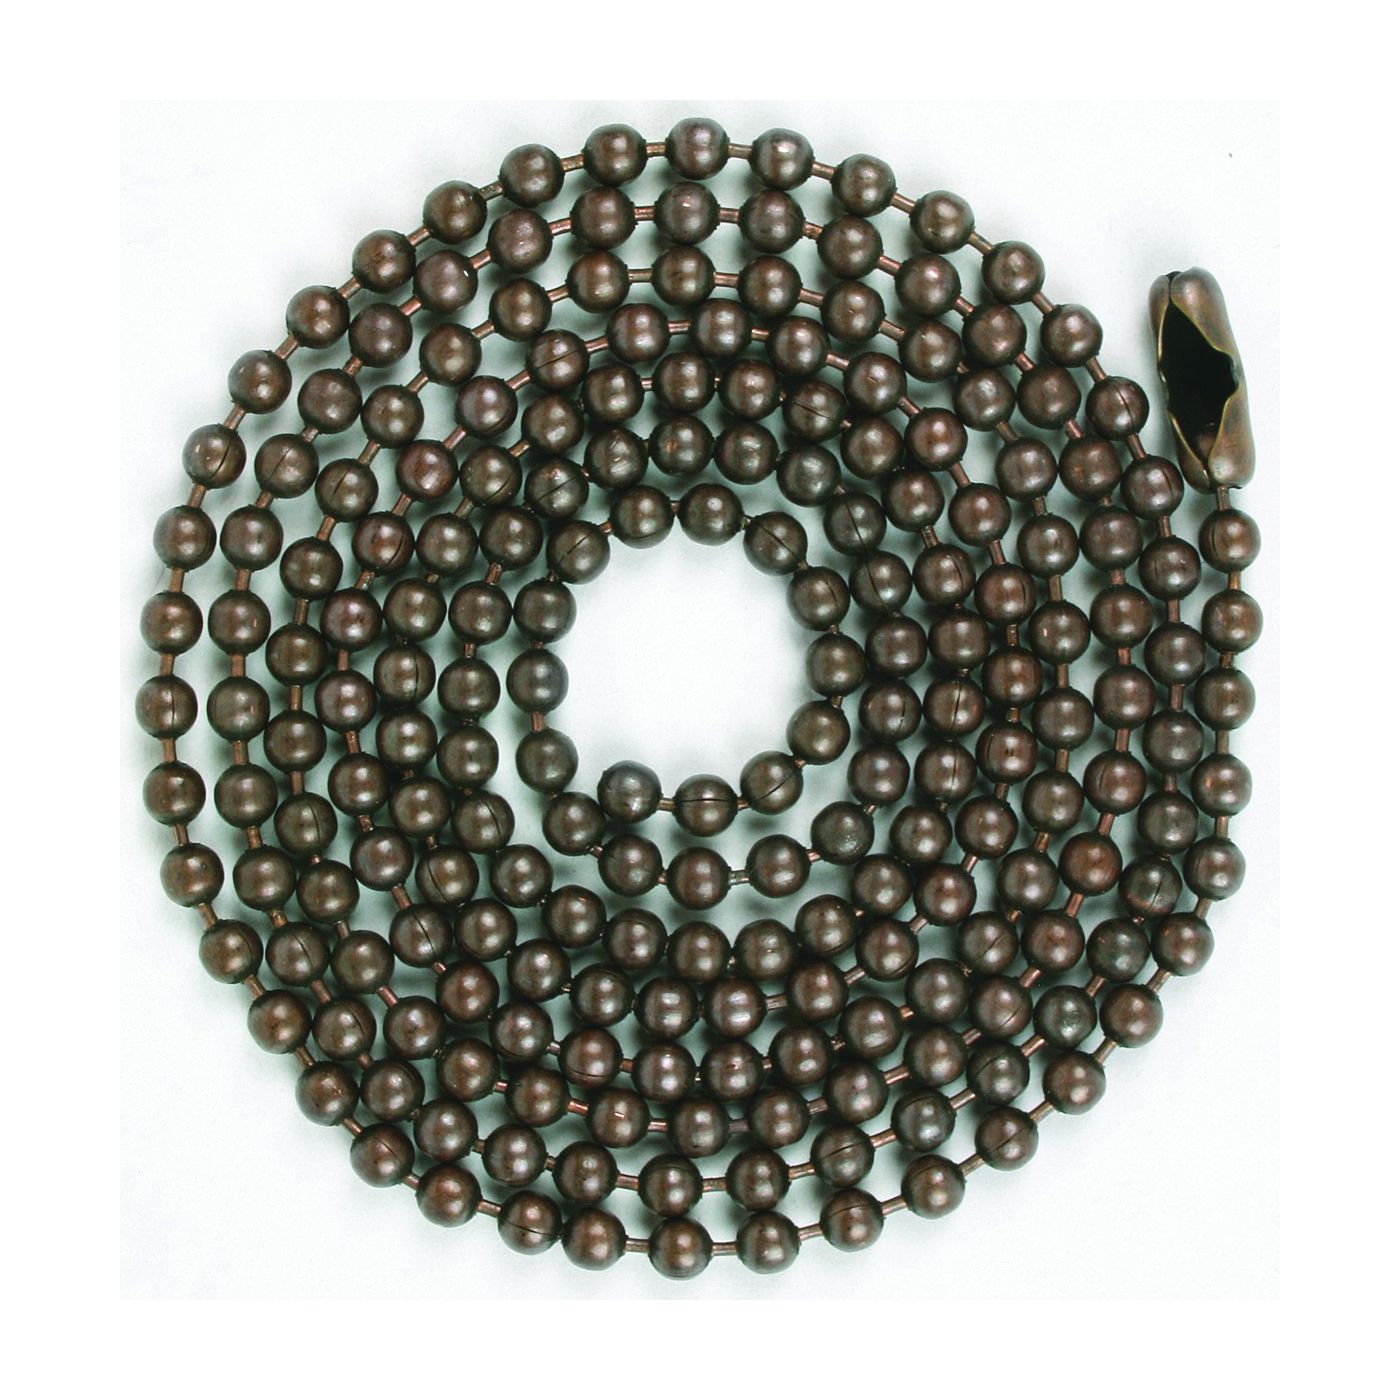 Jandorf 60352 Beaded Chain with Connector, 3 ft L, Rustic Bronze - 1